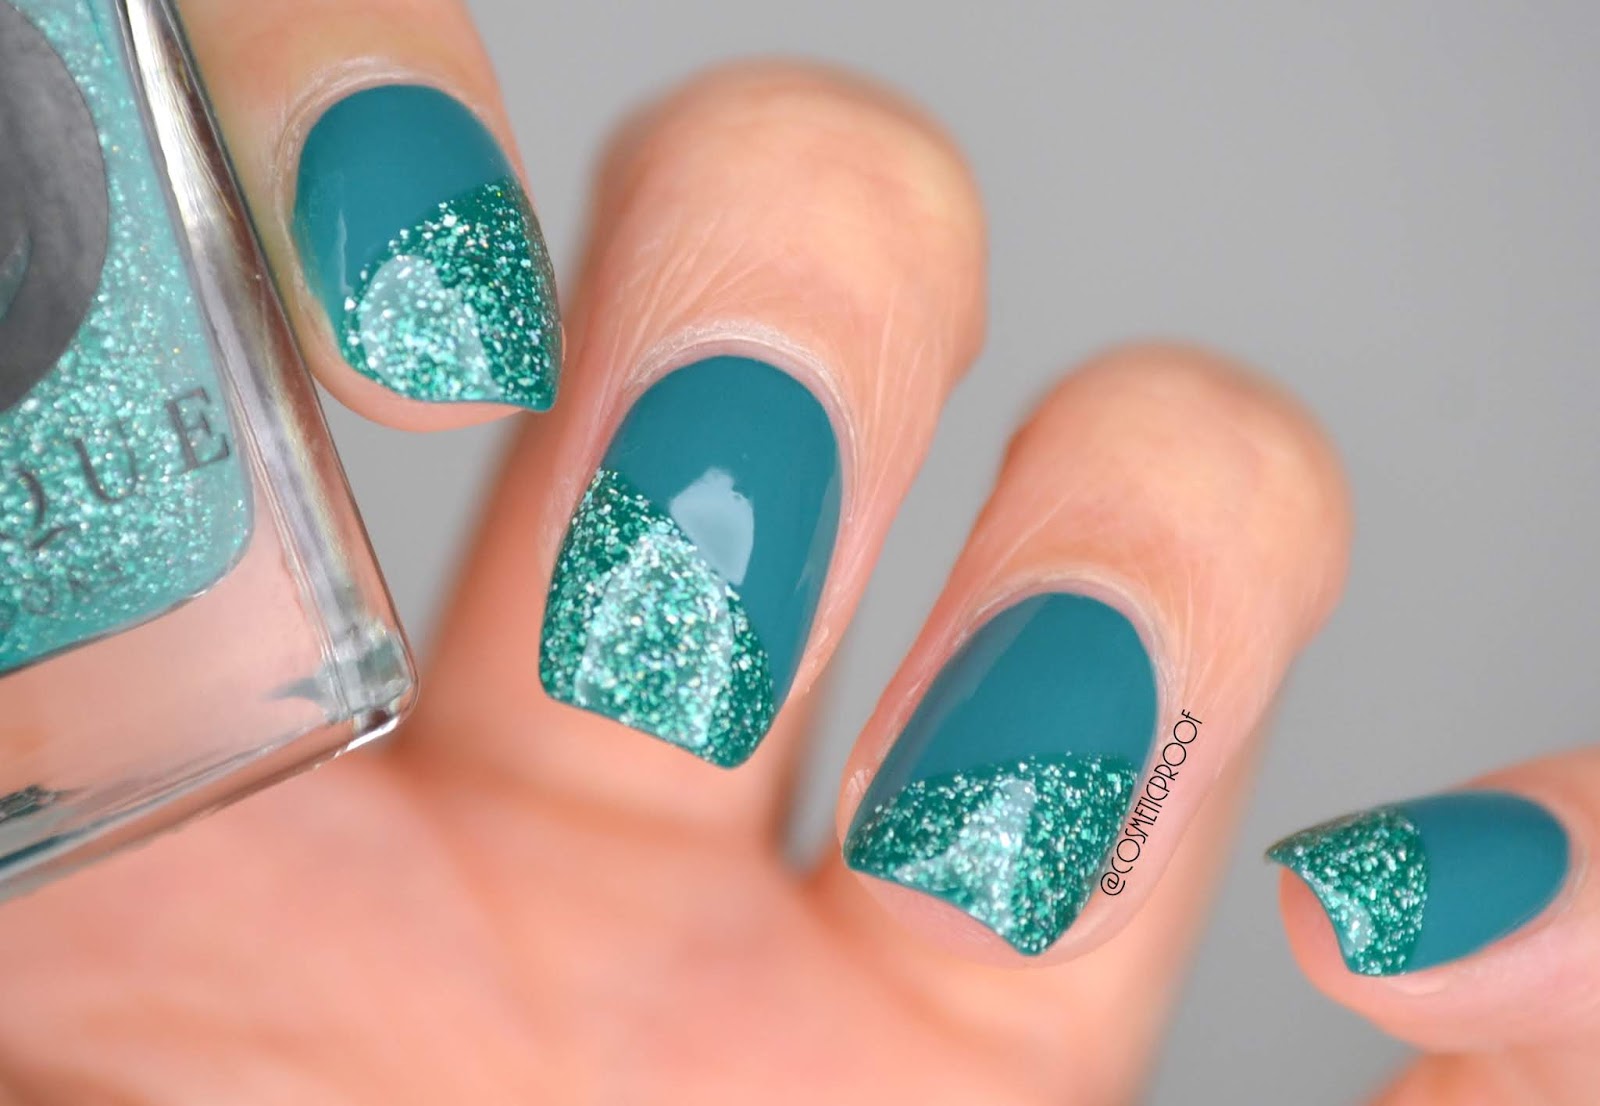 Teal and Brown Nail Art Ideas - wide 4